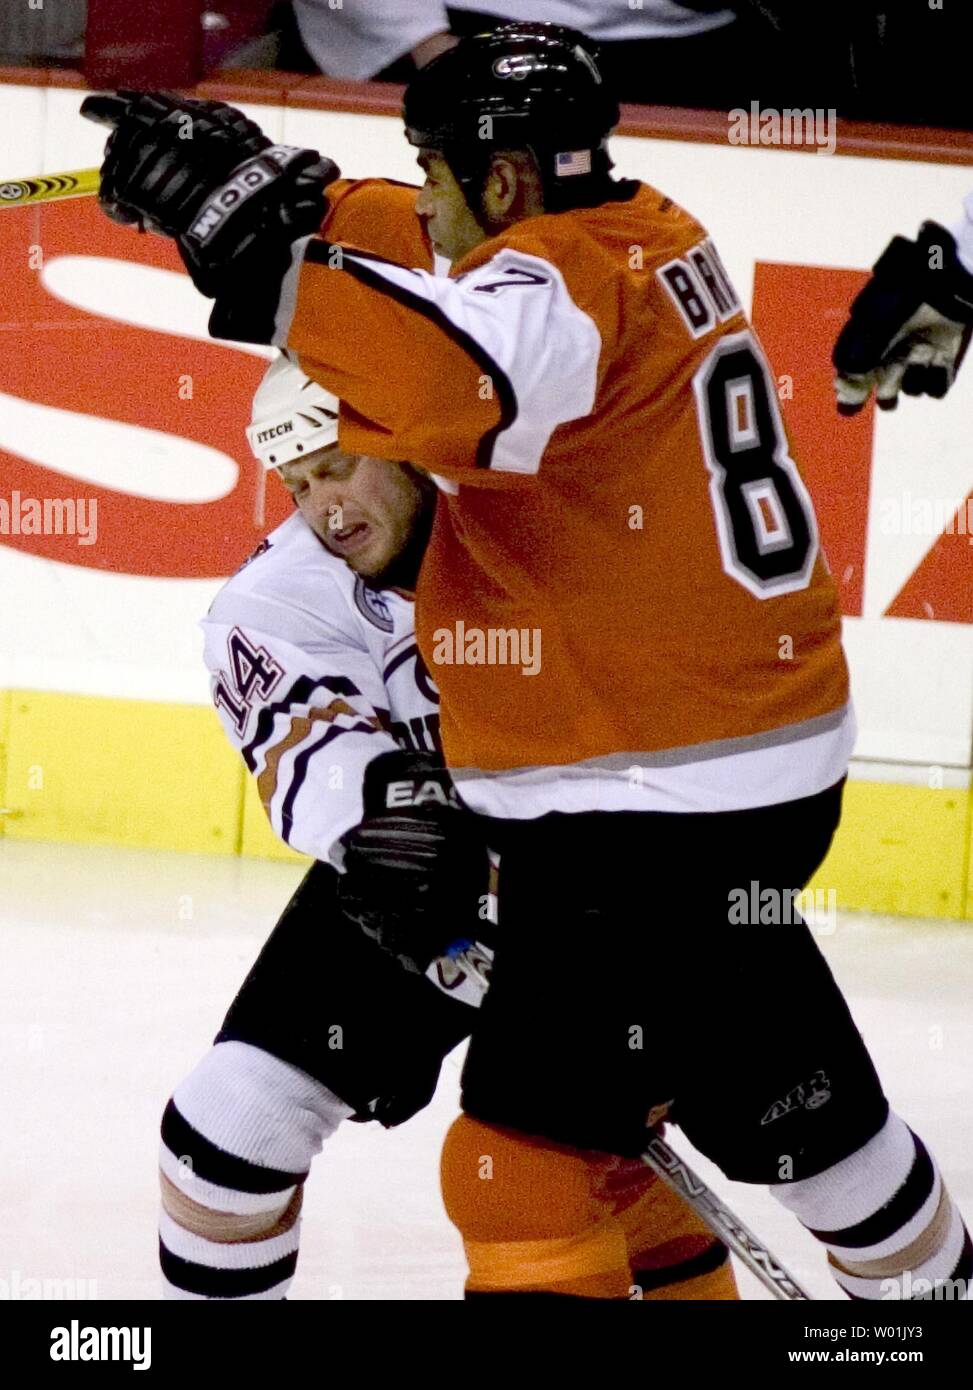 Photo: PHILADELPHIA FLYERS VS THE TAMPA BAY LIGHTNING 2004 STANLEY CUP  PLAYOFFS - PHI2004051315 